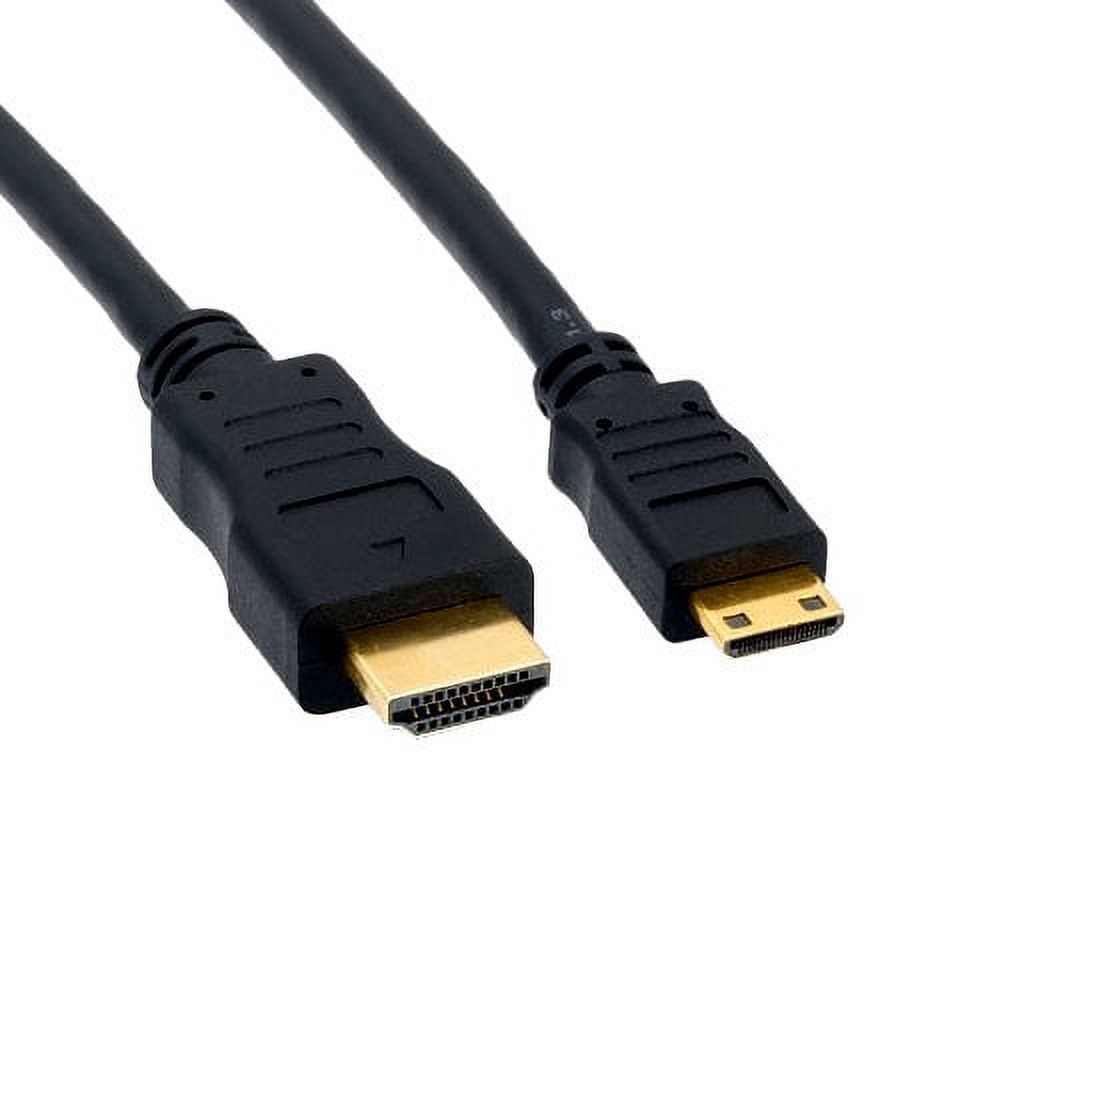 Kentek 10 Feet FT High Speed Mini HDMI to HMDI Cable with Ethernet Male to Male M/M 30 AWG 1080P Ver. 1.3 Gold-Plated Connector Cord HDTV Digital Camera Tablet Camcorder Type A to C - image 1 of 1